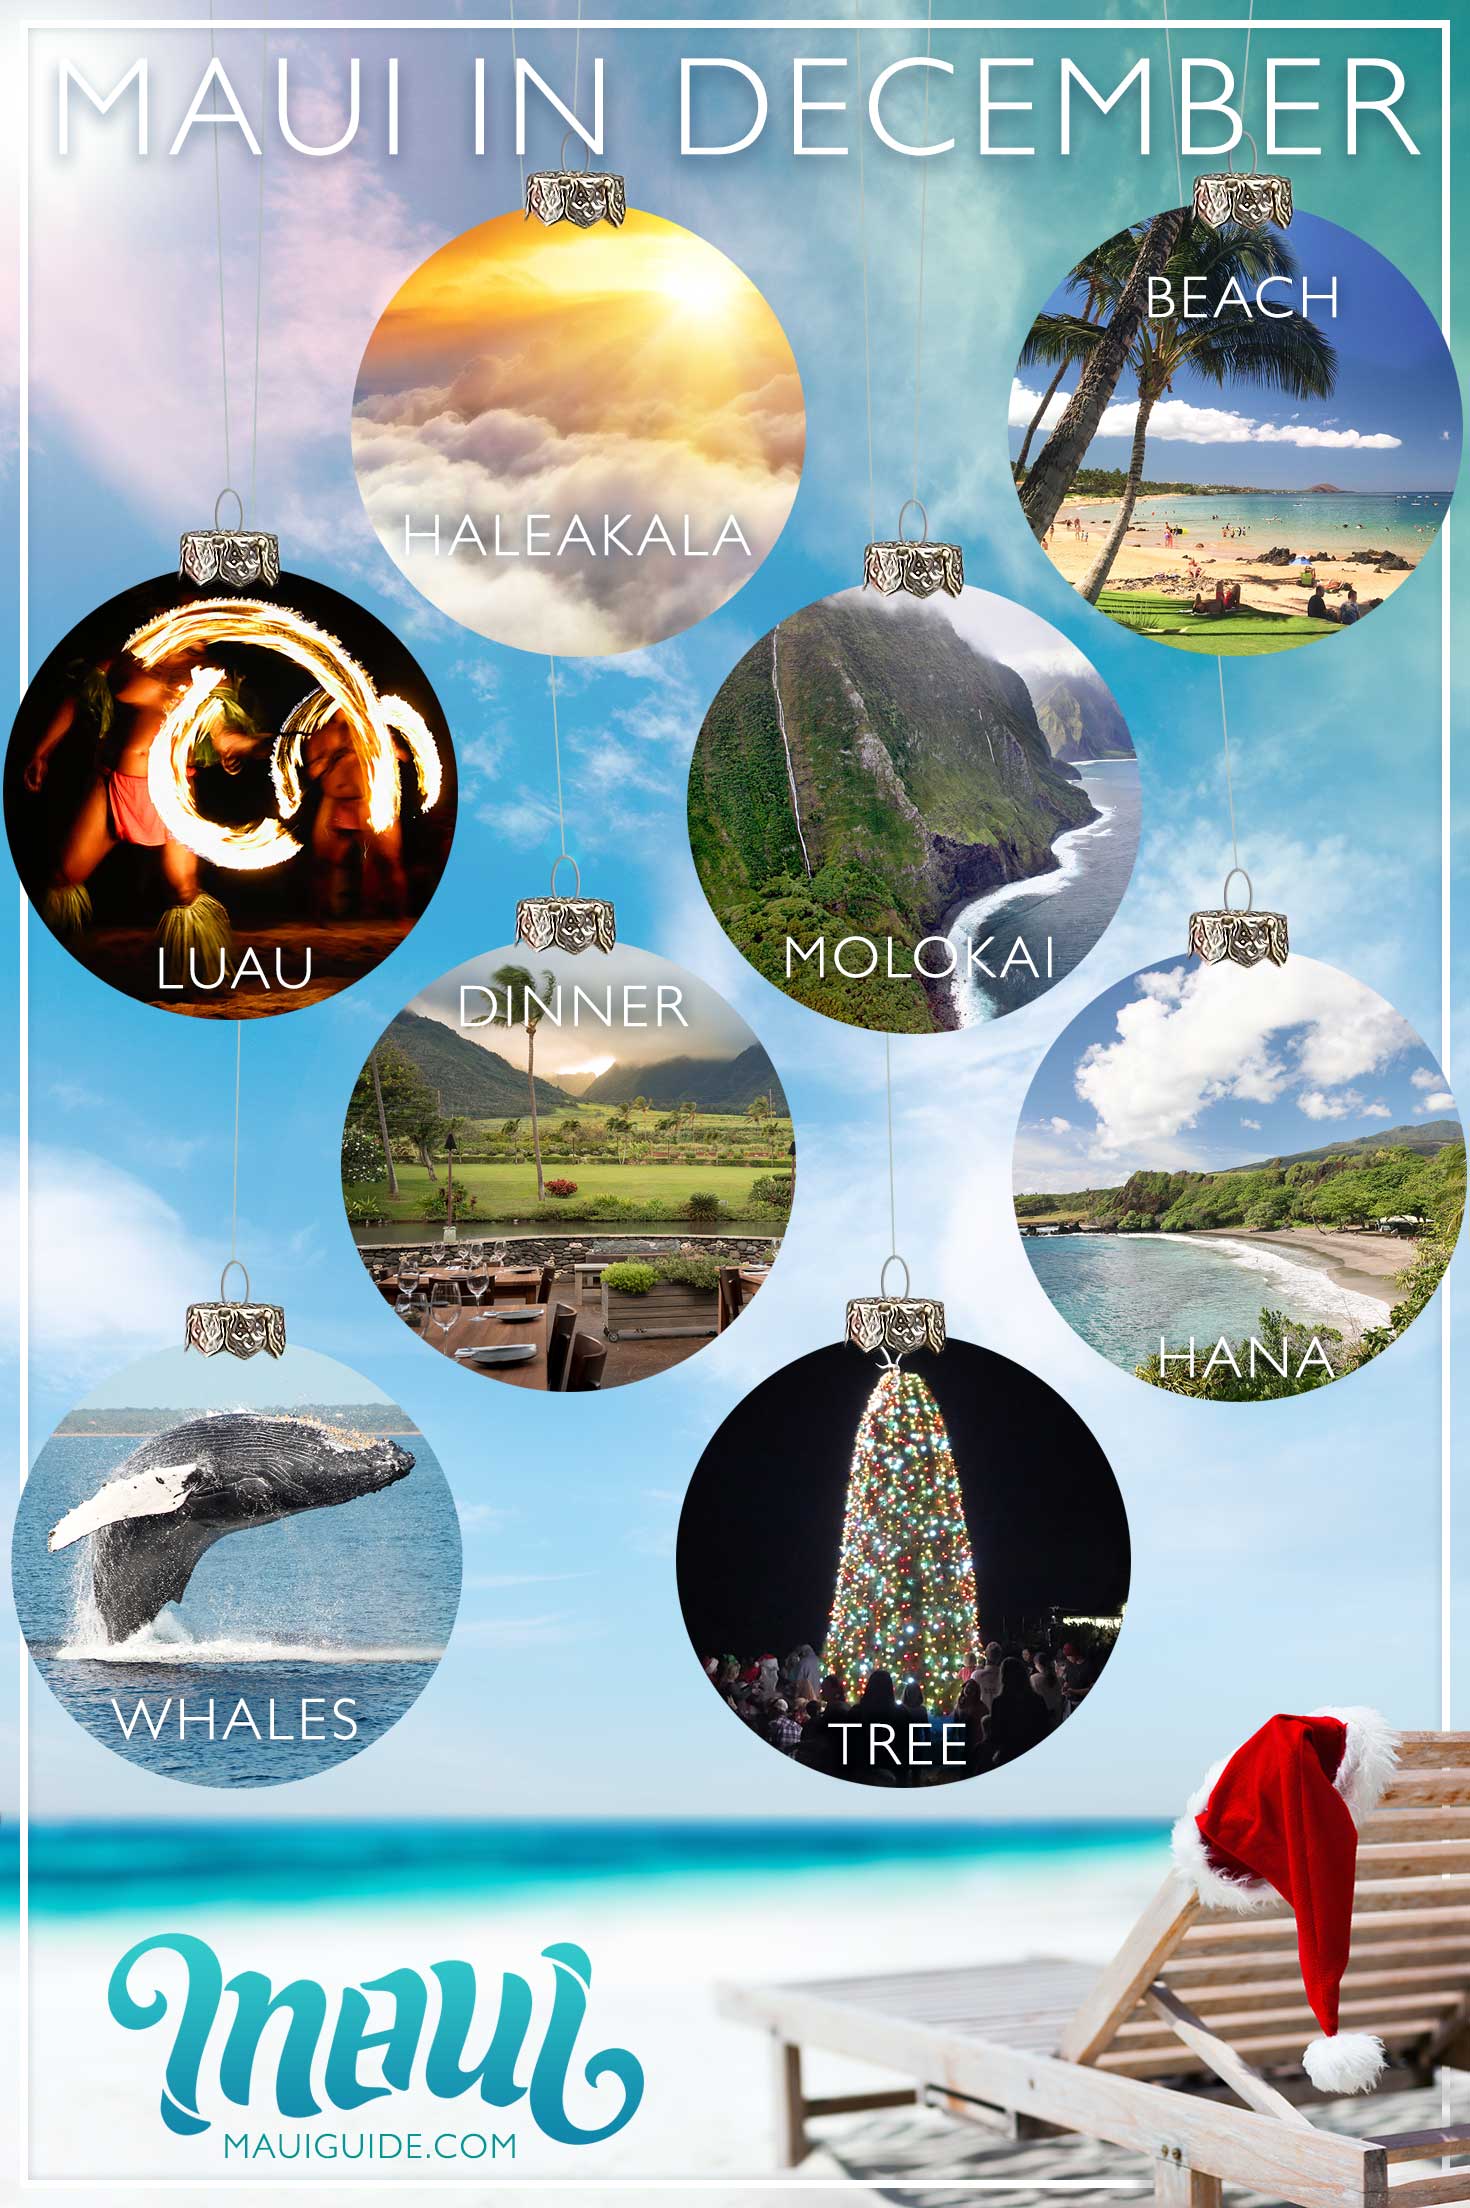 Maui in December Infographic: 8 Chrismas ornaments corresponding to 8 things to do in December on Maui